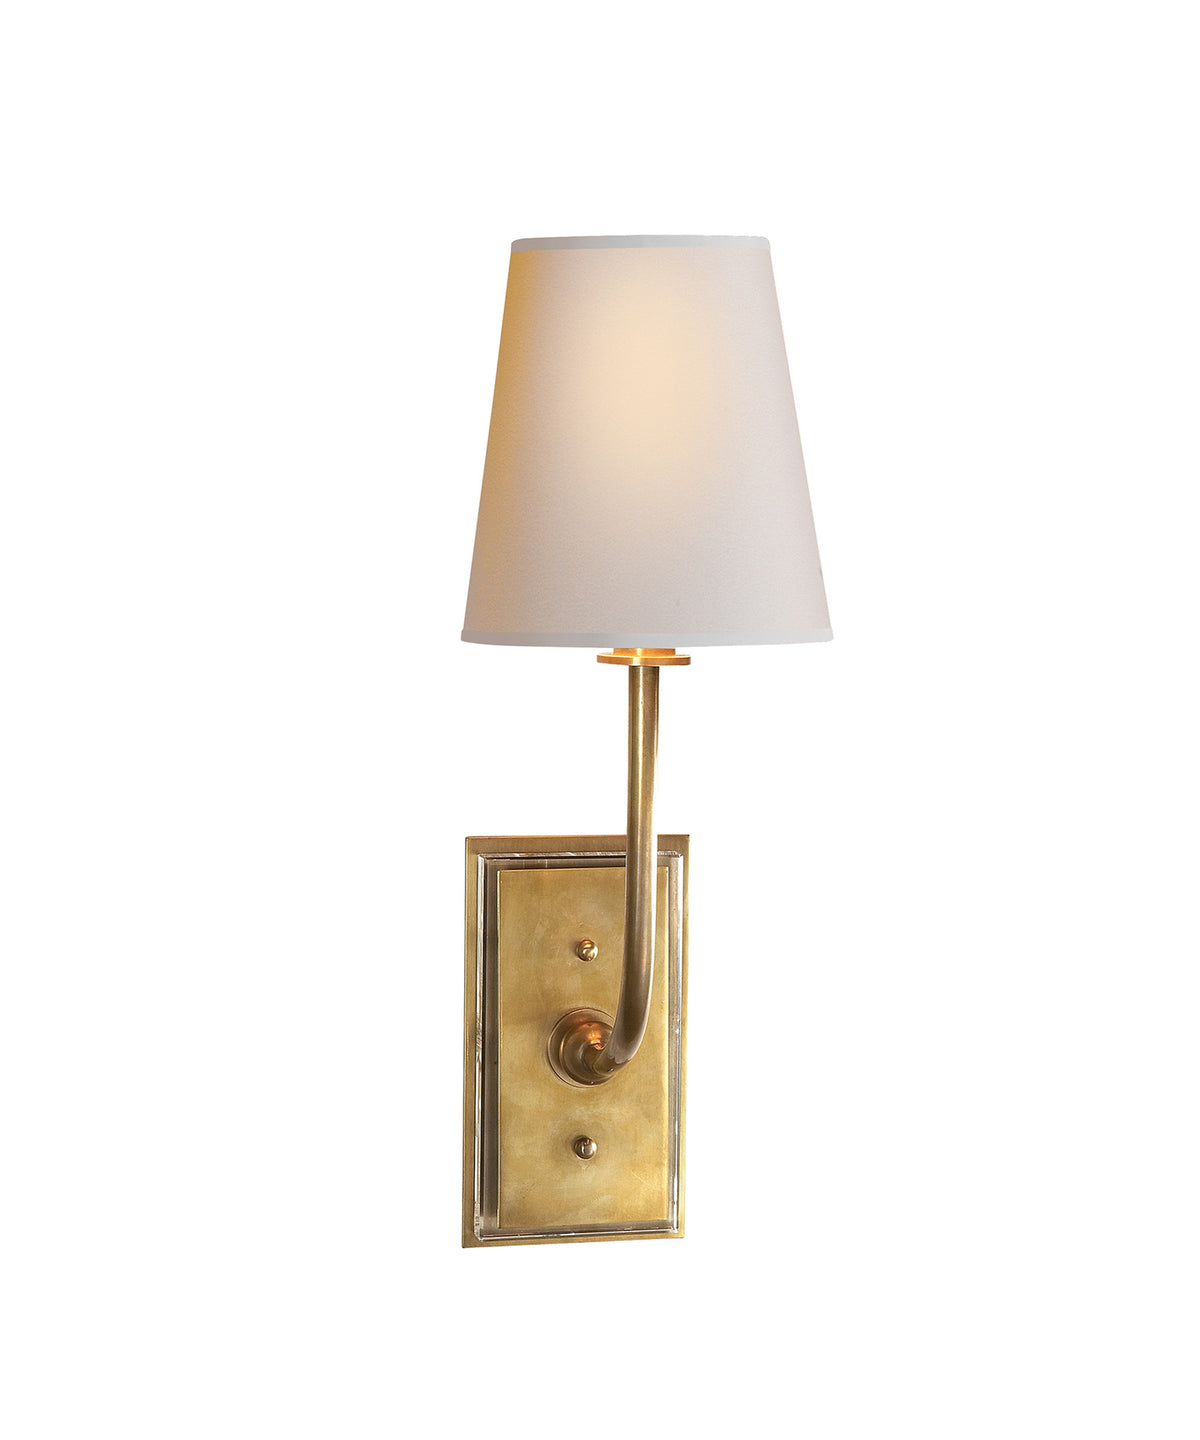 Swivel Head Wall One Light Wall Sconce in Hand-Rubbed Antique Brass